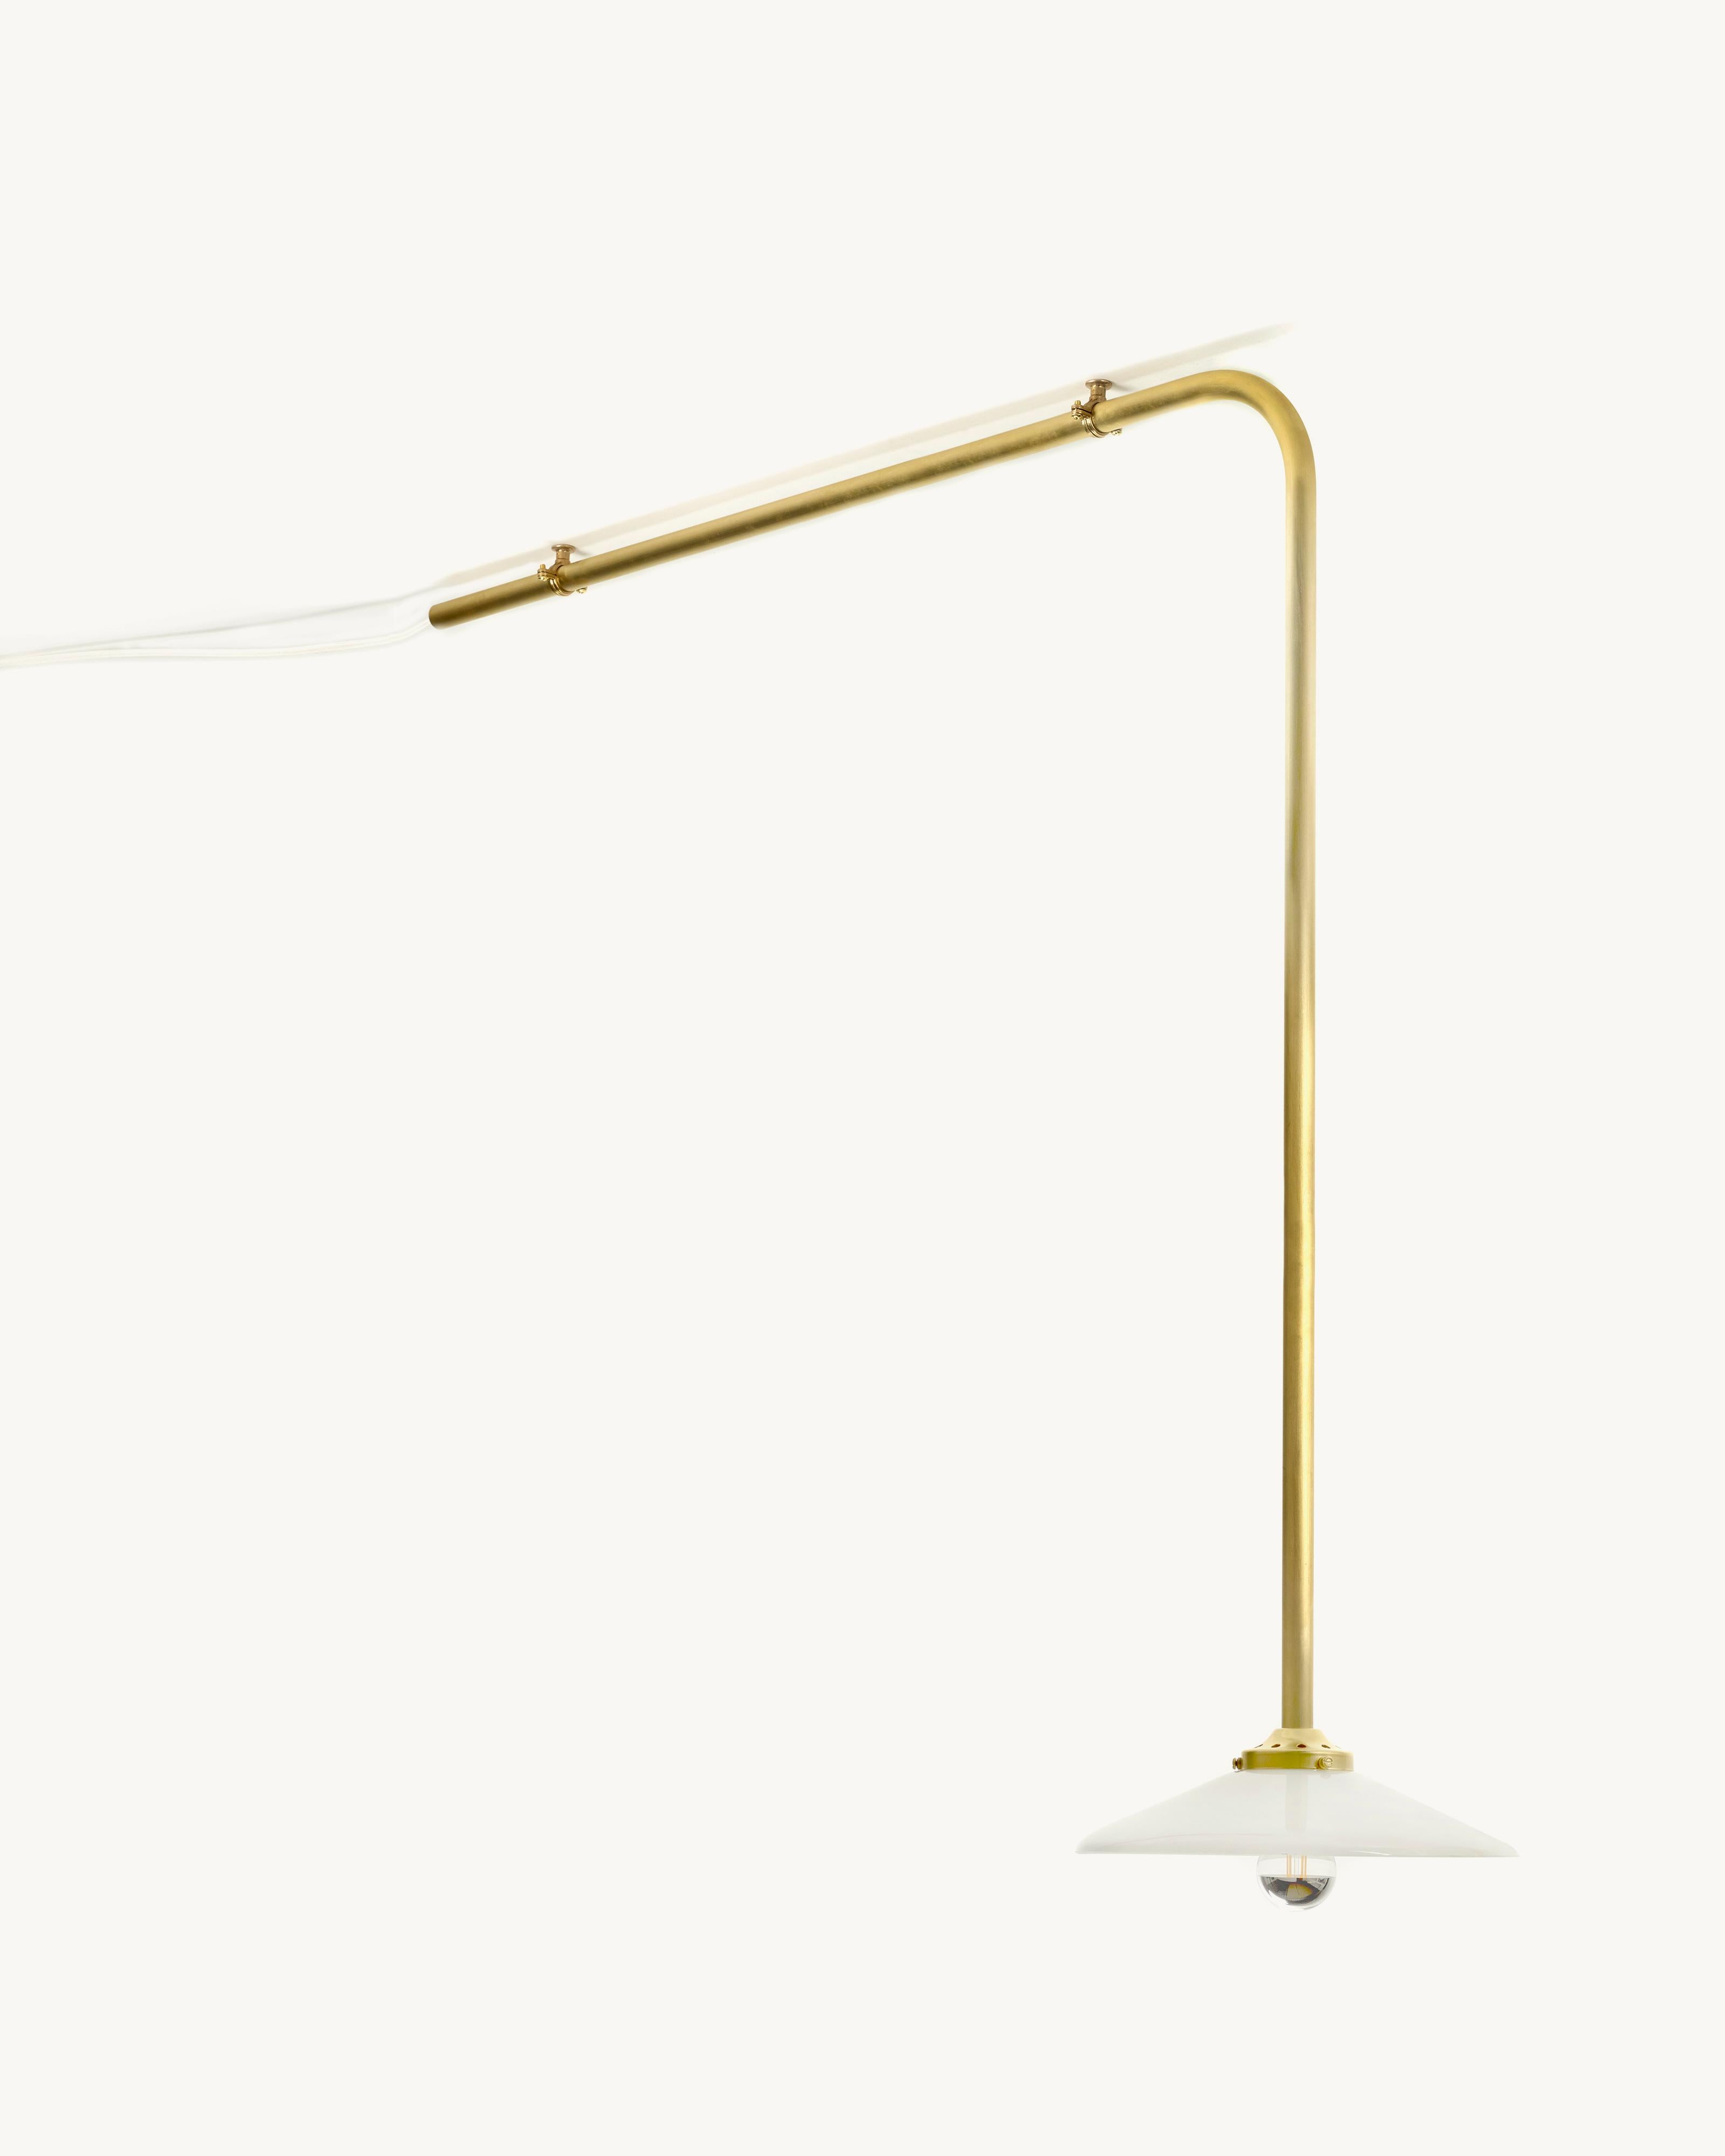 Organic Modern Contemporary Ceiling Lamp N°1 by Muller Van Severen x Valerie Objects, Brass For Sale